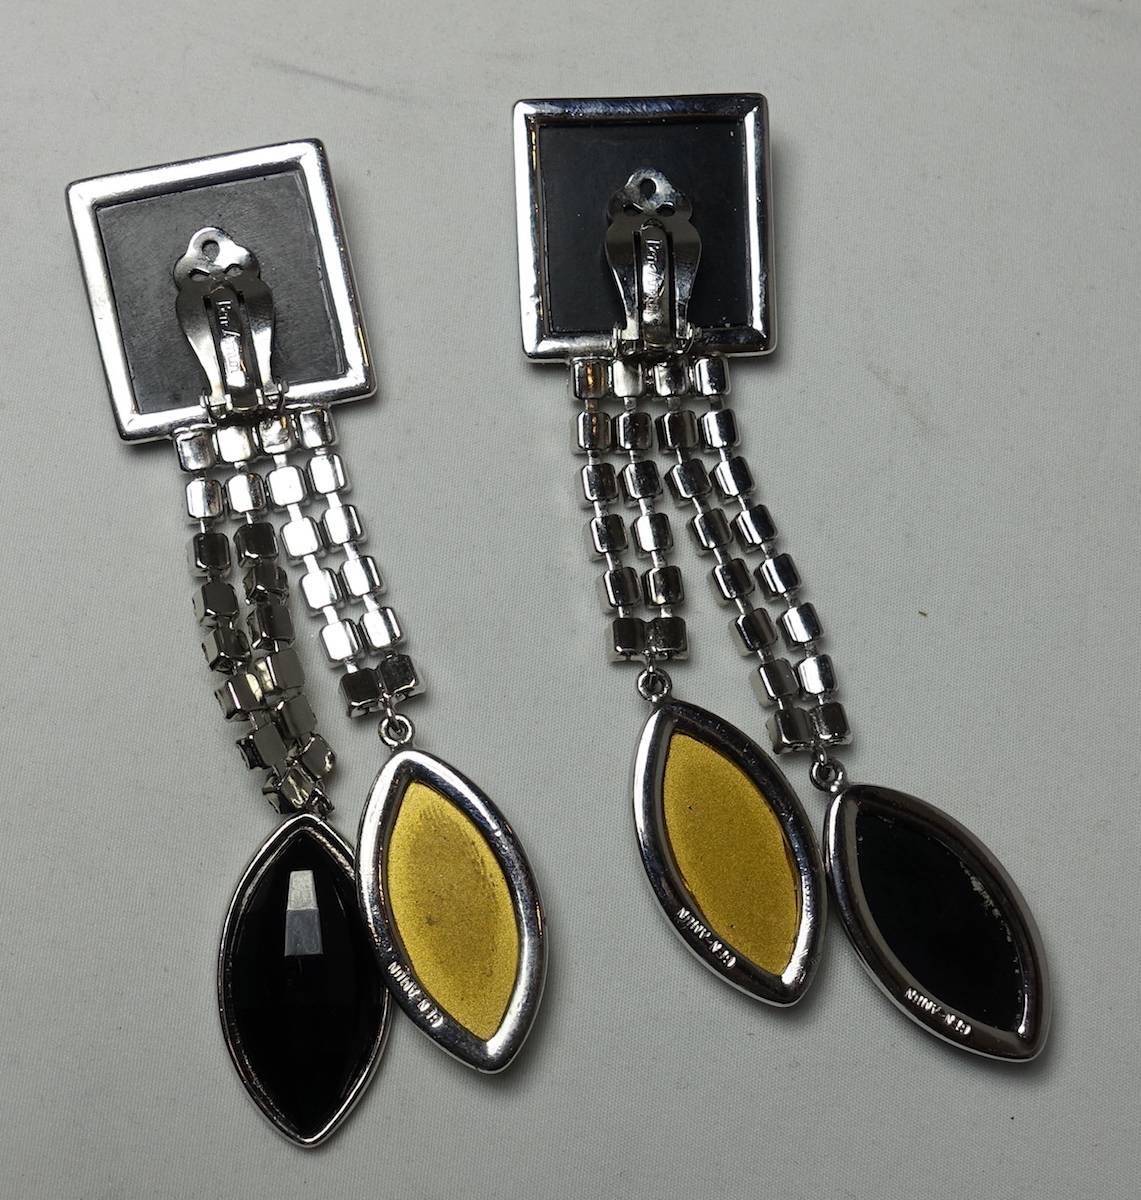 These long drop earrings feature a deco design with a black resin squares at the top. Two rows of clear rhinestones lead down to a black and clear teardrops. These clip earrings measure 4-3/8” x 1-1/4” and are in excellent condition.